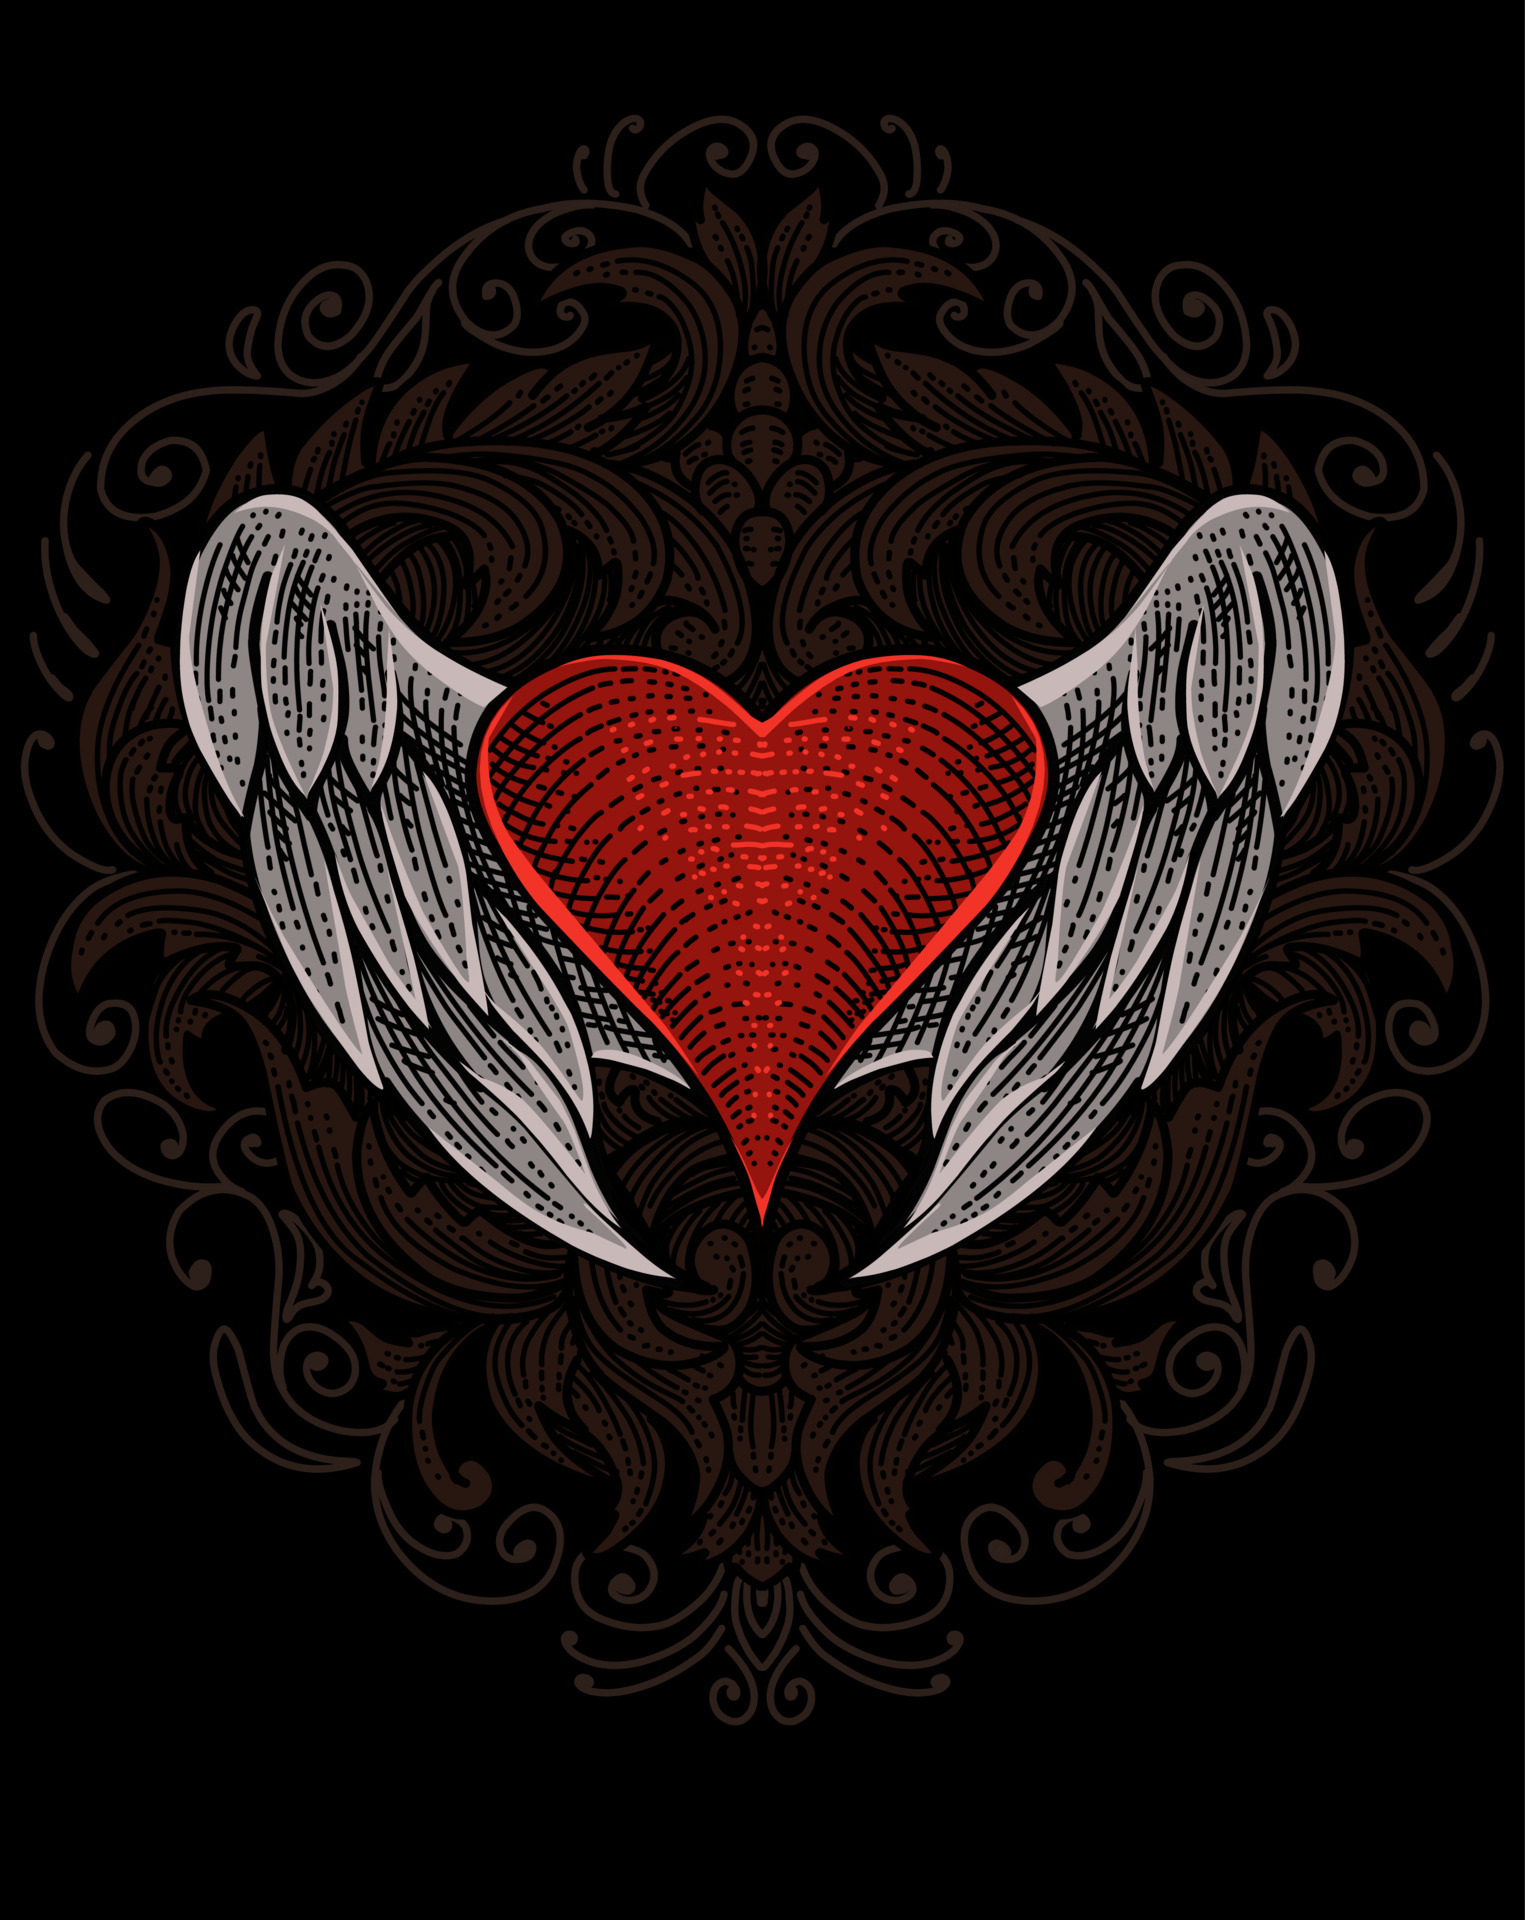 Heart With Wings Wallpaper 63 images